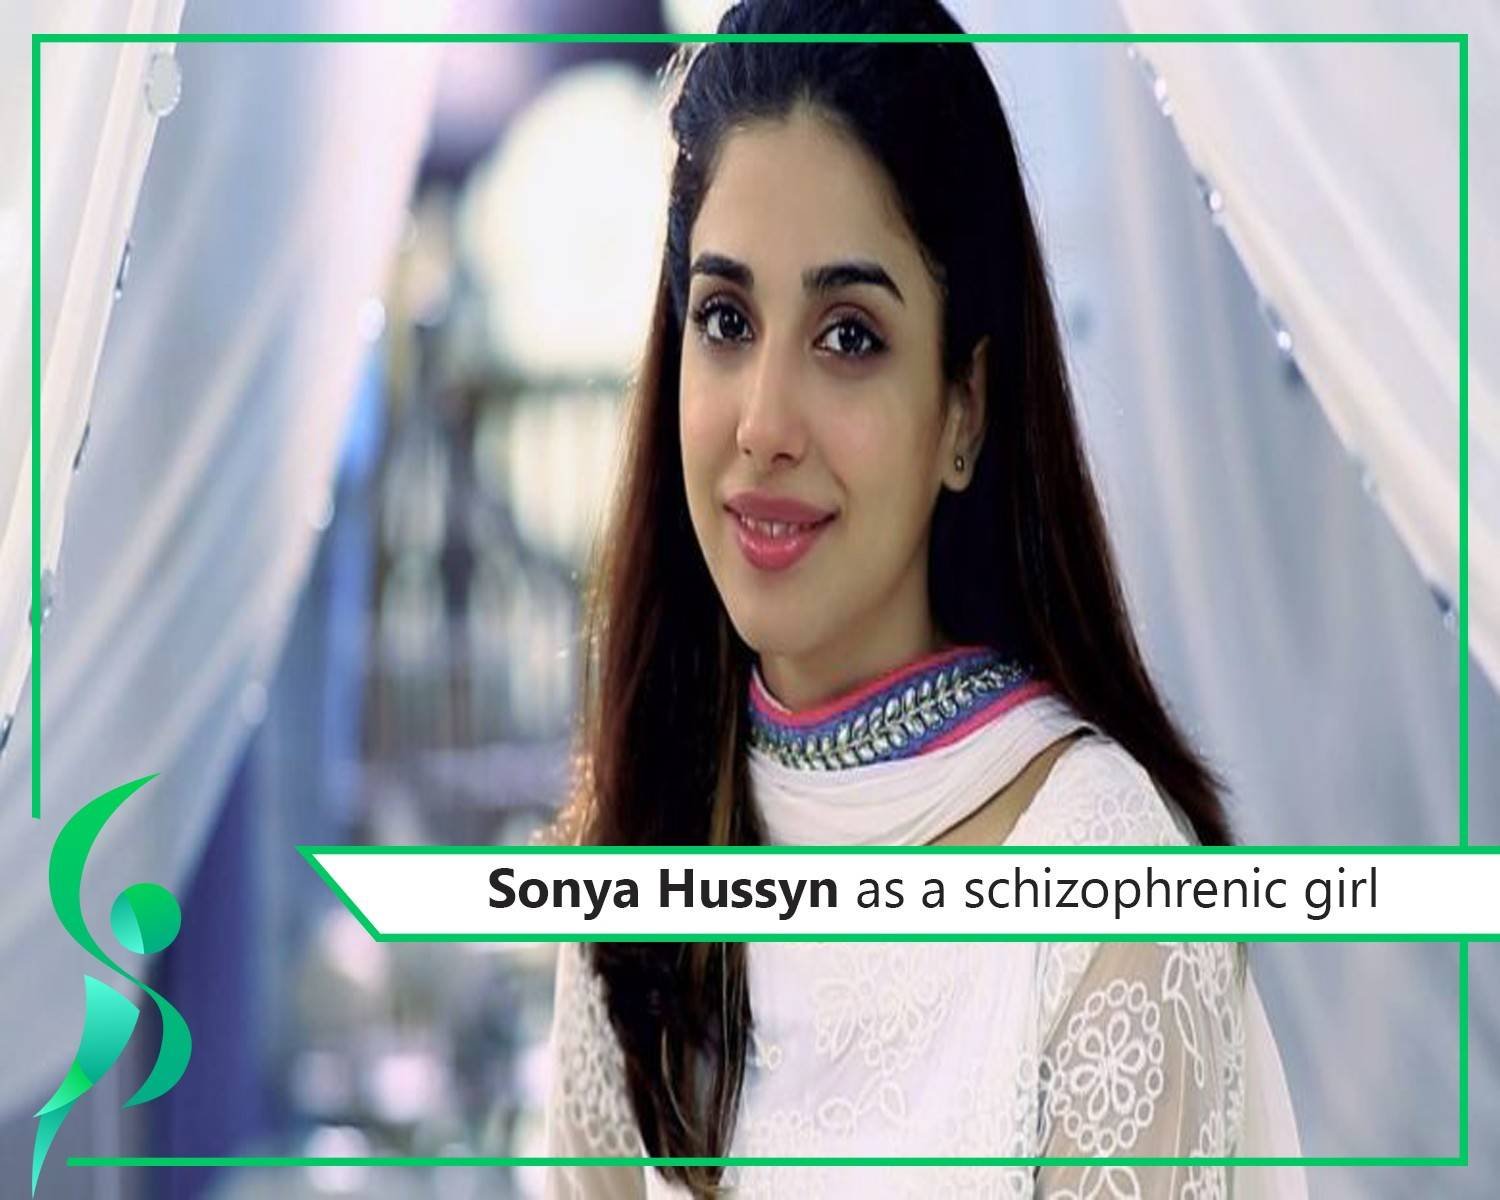 Sonya Hussyn to depict a character of a schizophrenic girl